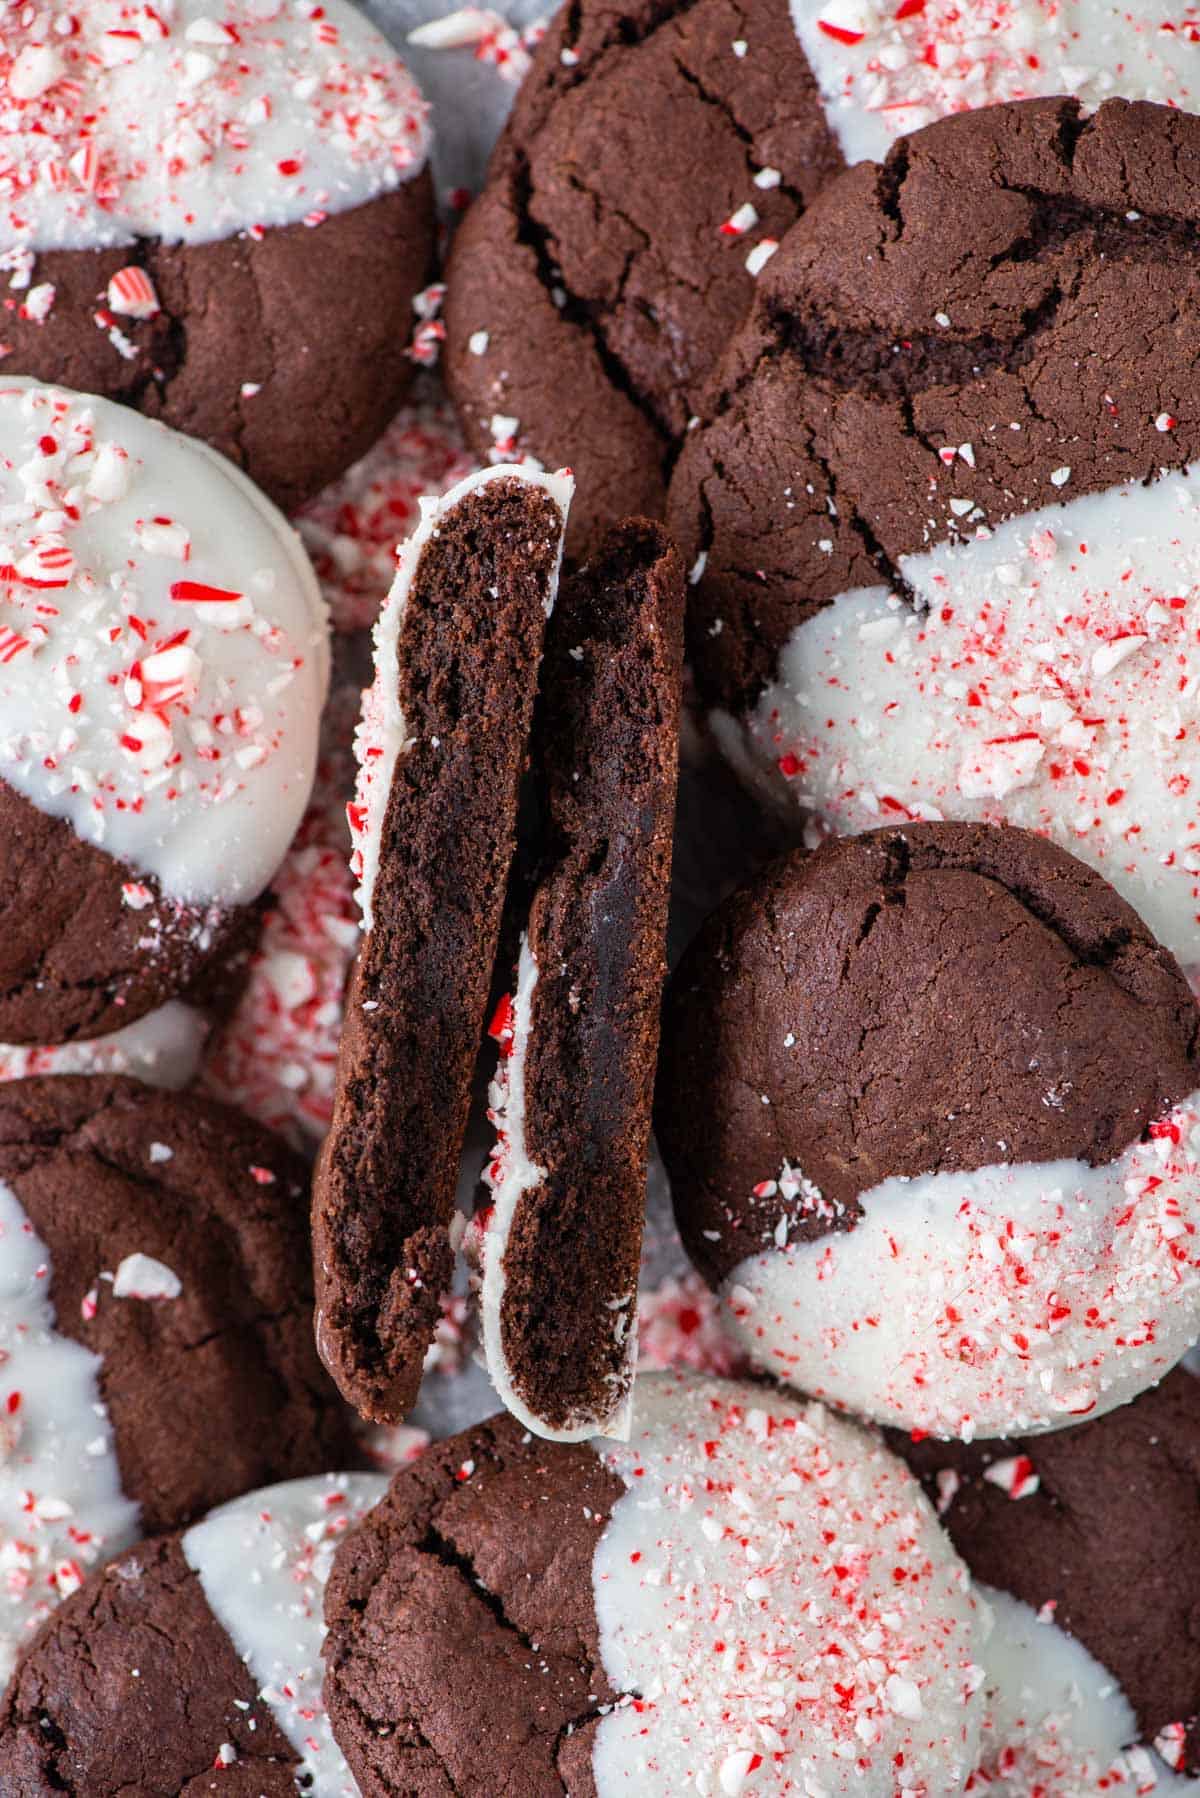 A candy cane chocolate cookie cut in half on top of other cookies